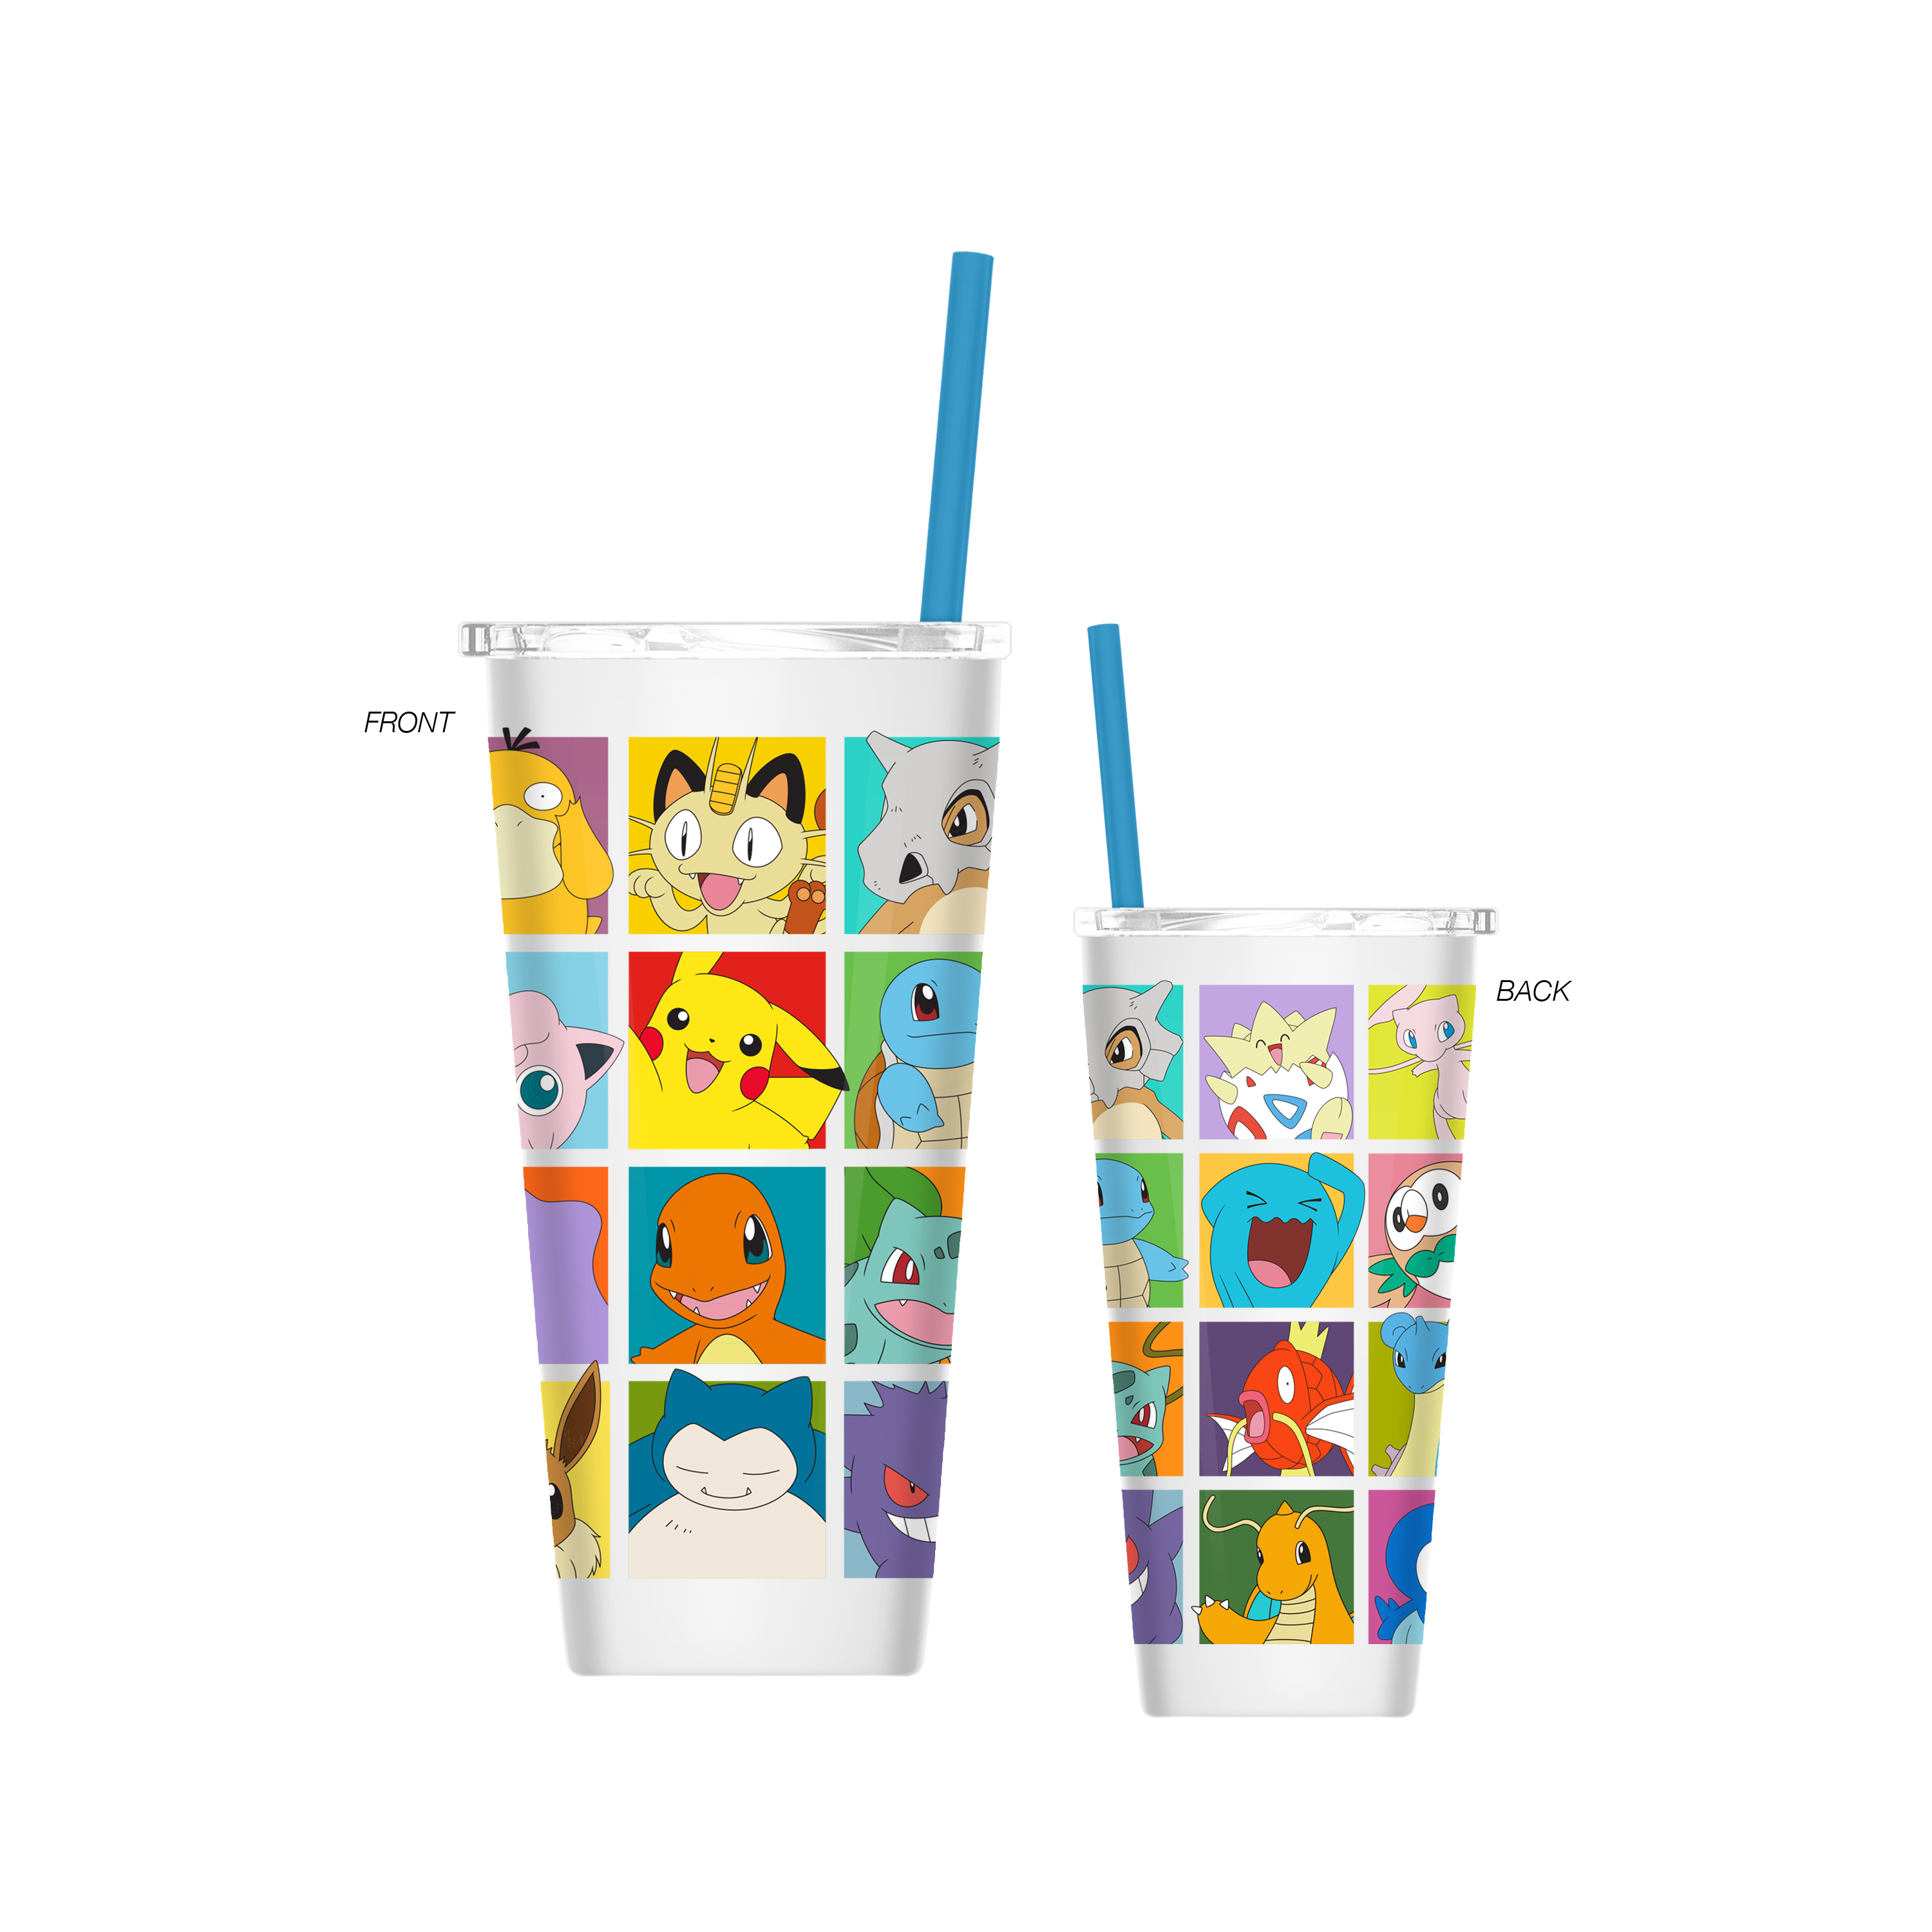 https://media.gamestop.com/i/gamestop/20004541/Pokemon-Character-Grid-22oz-Double-Walled-Stainless-Steel-Tumbler-with-Straw